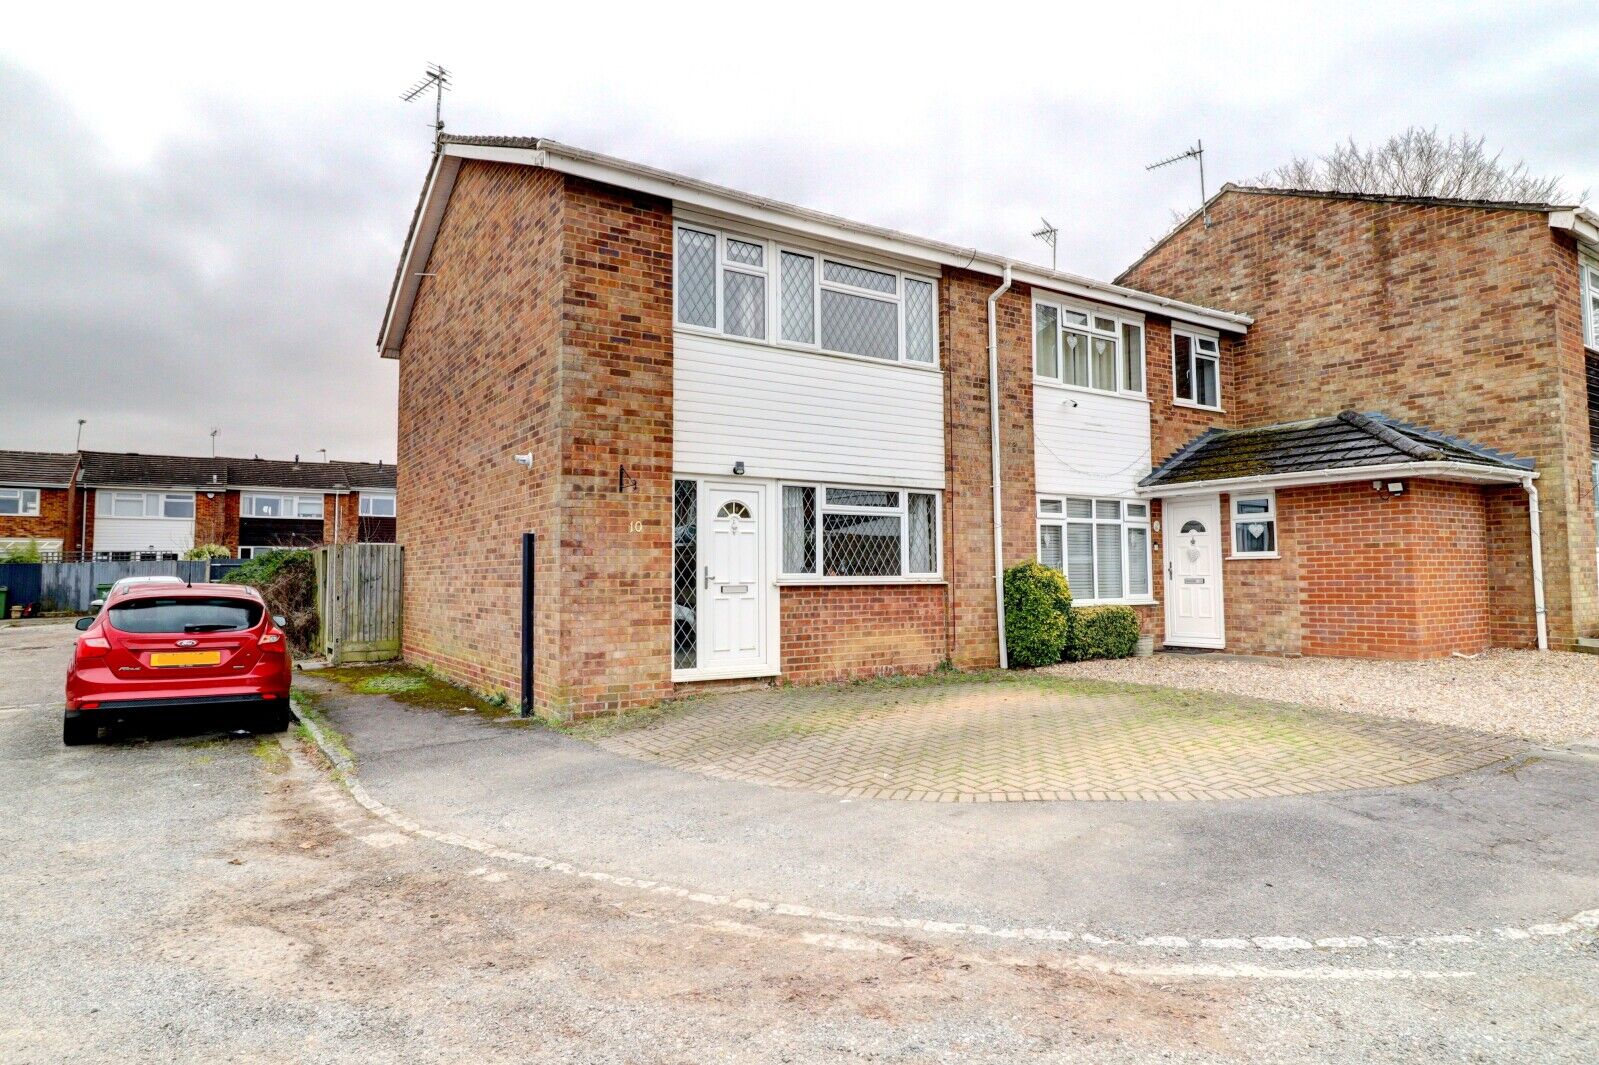 3 bedroom end terraced house for sale Beechfield Way, Hazlemere, HP15, main image